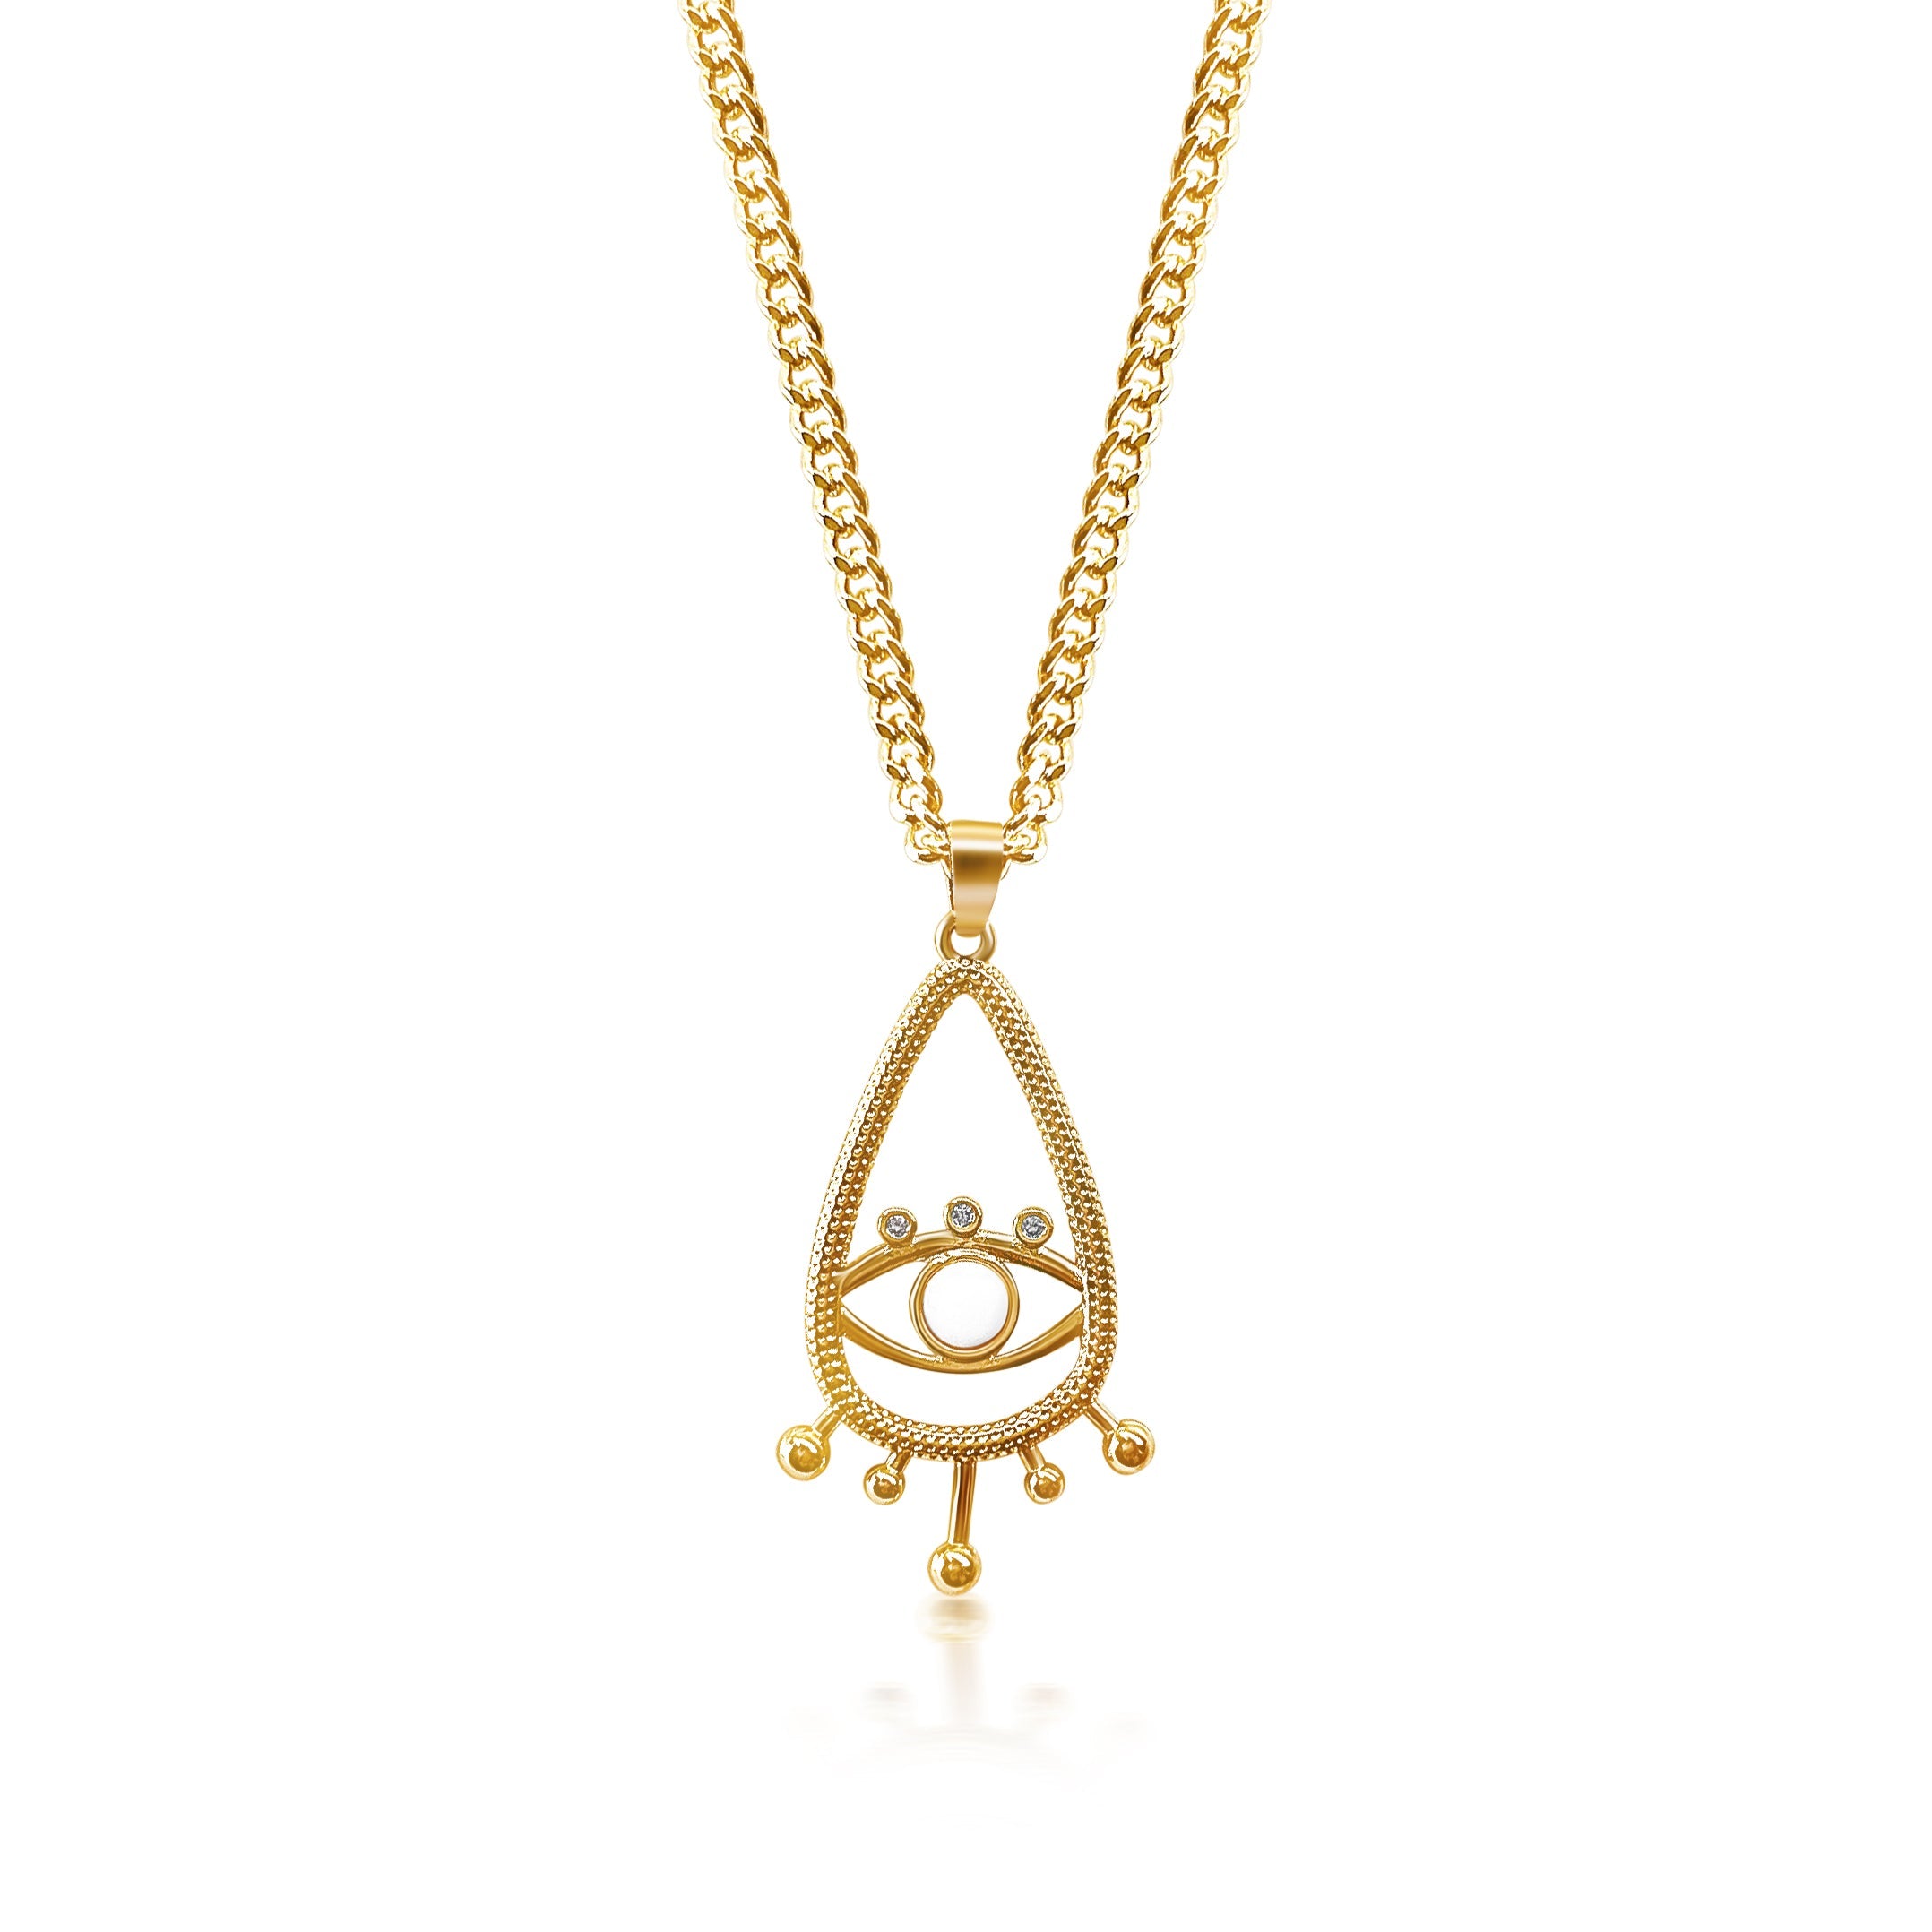 Buy Blue Evil Eye Pendant With Gold Chain for Women Online in India